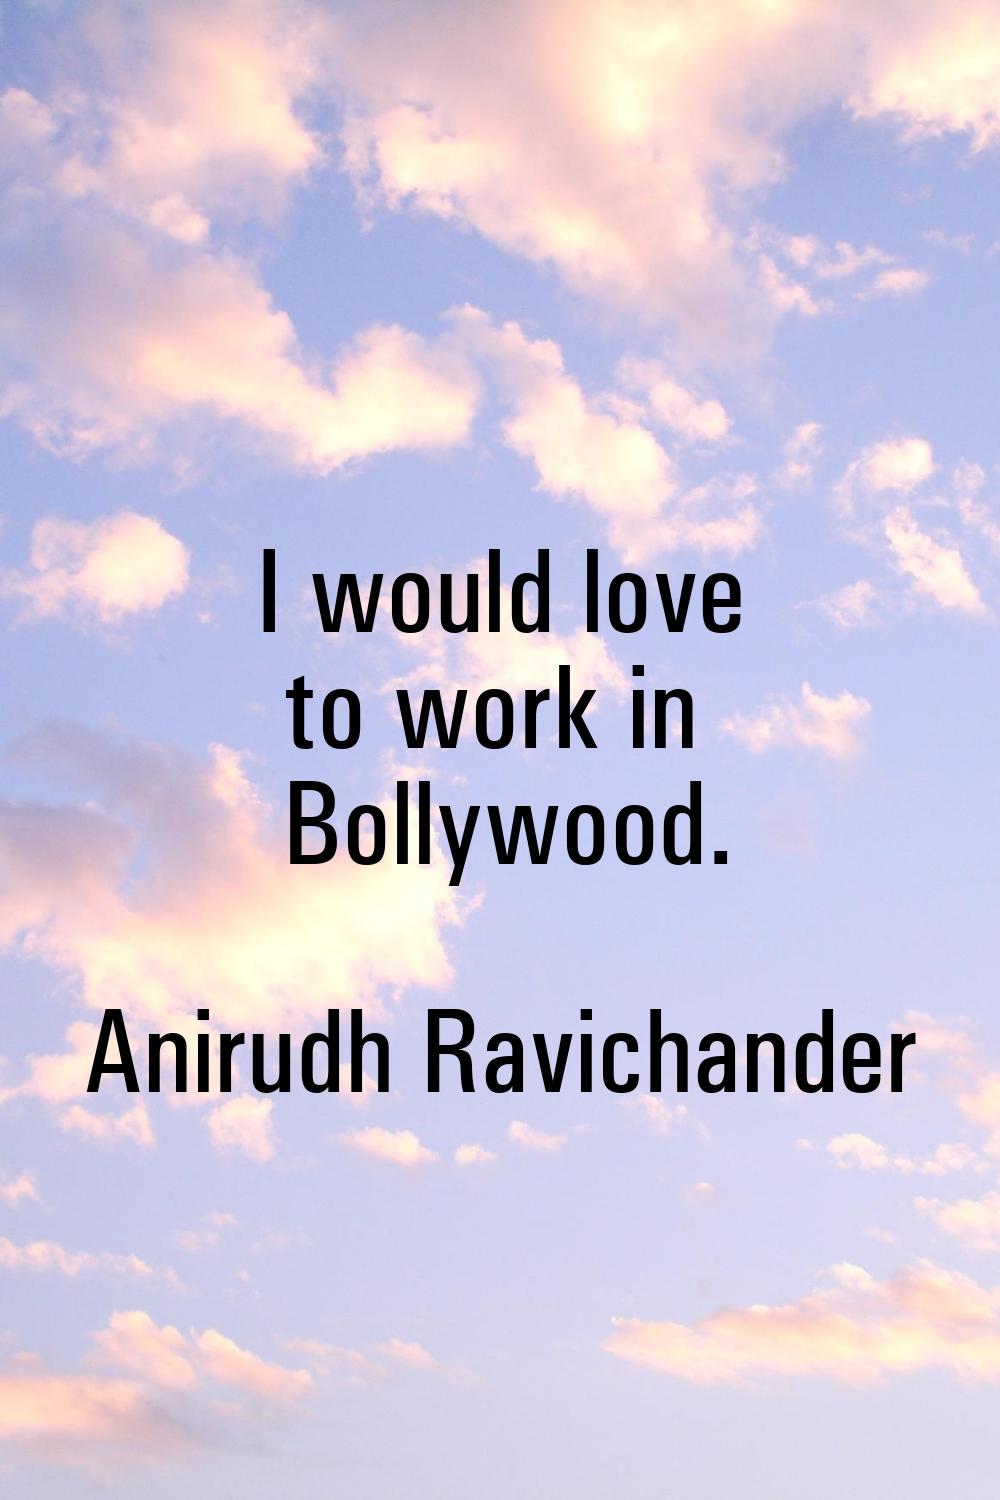 I would love to work in Bollywood.